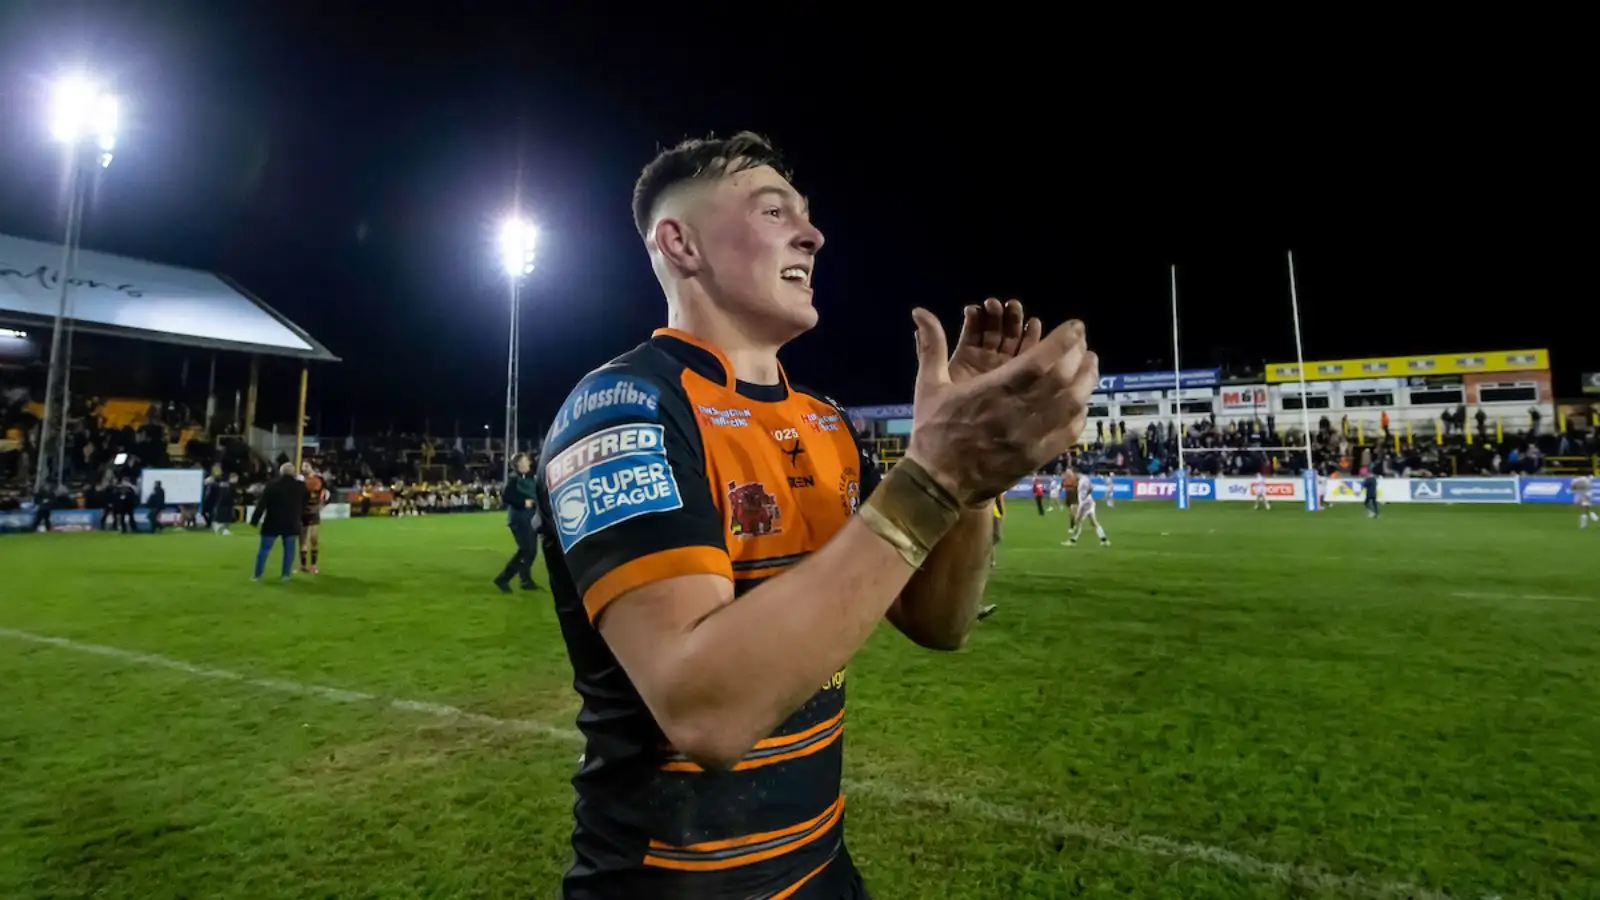 Coach hails off-season recruit who has made “exceptional” start at Castleford